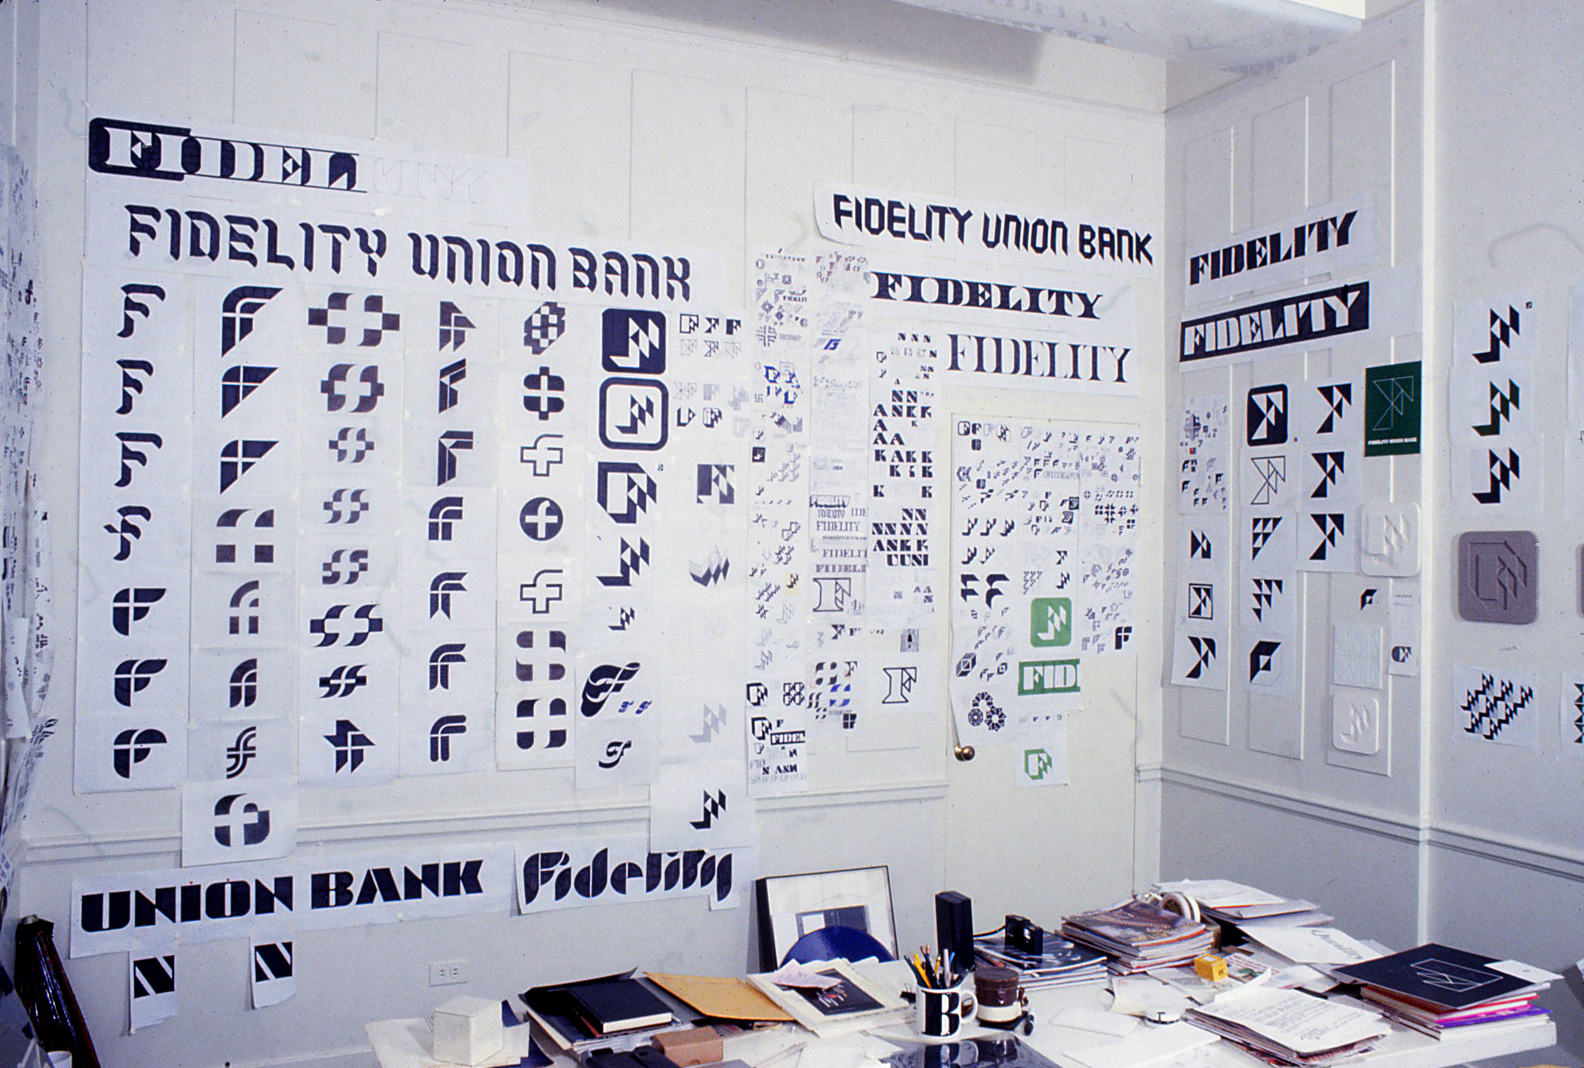 Photo of the office desk of Bill Cannan office desk at 2112 Broadway in New York City surrounded with dozens of hand drawn 
        design development drawings for the Fidelity logo and typeface illustrating the painstaking process of trial and error 
        that led to the finished products in the days before computer graphics.